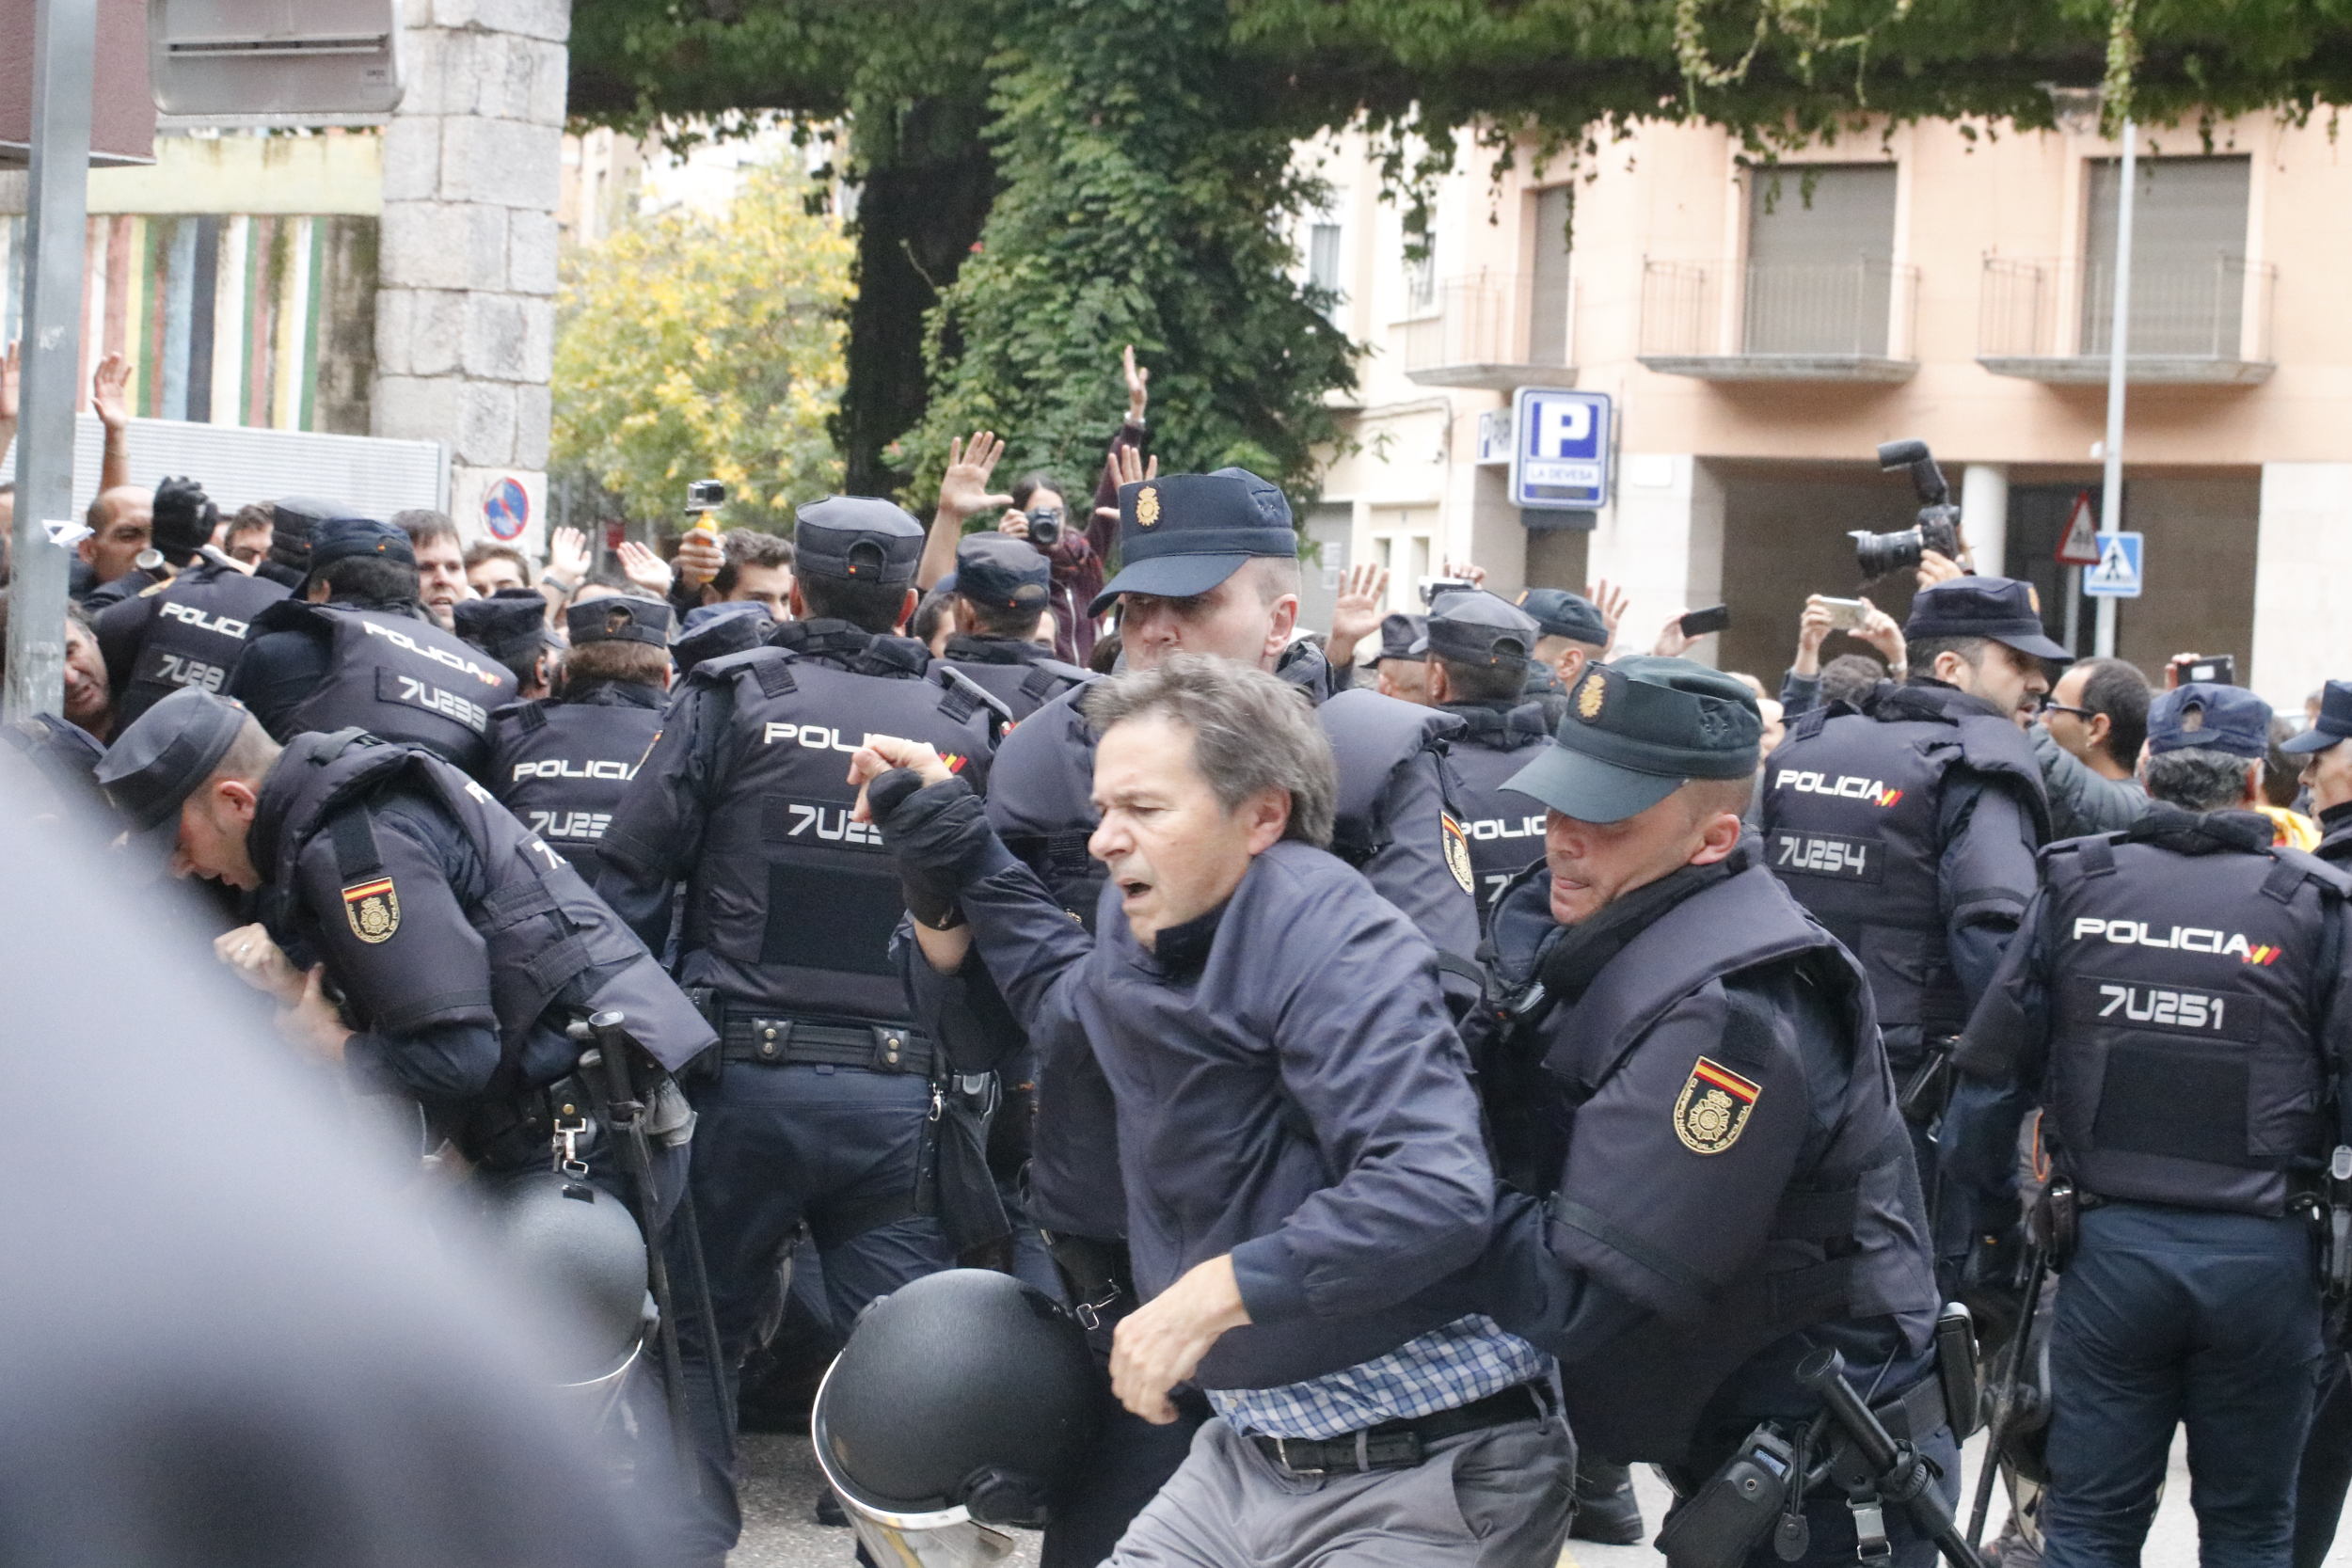 Spanish police officers deployed in Girona to stop the referendum on October 1, 2017 (by Marina López)